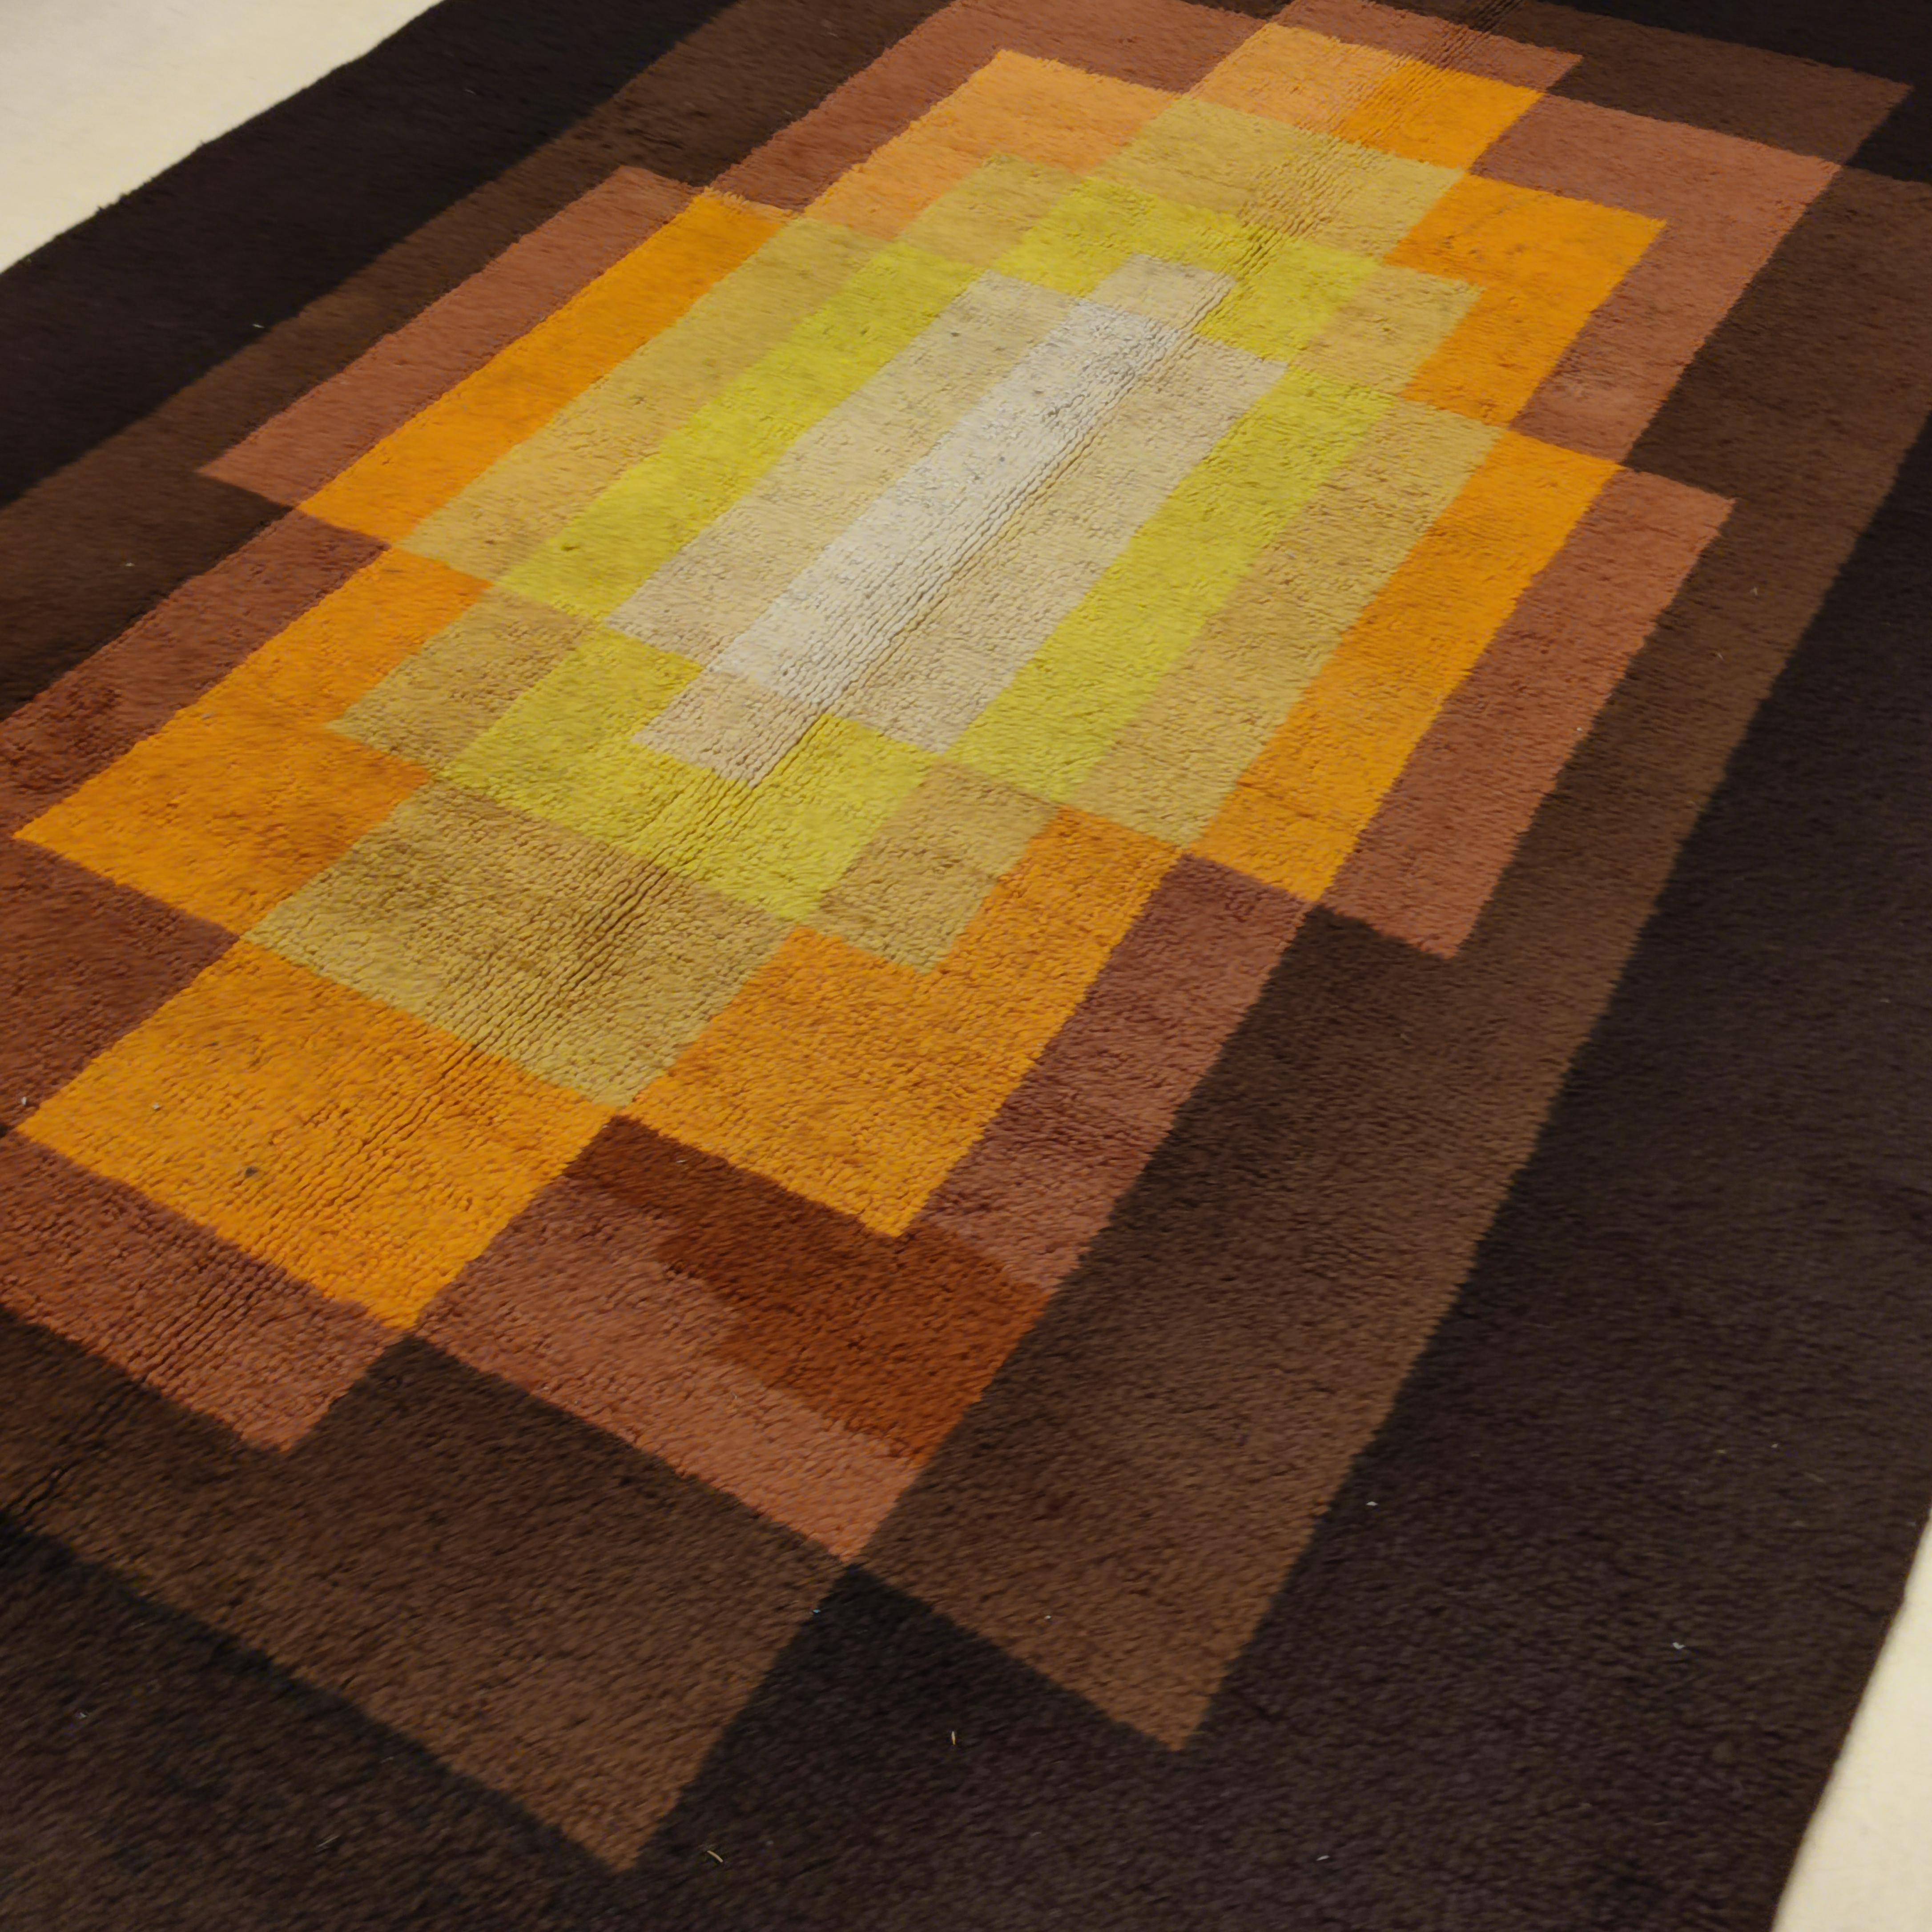 Mid-20th Century Antique French Cubist Art Deco Rug in Yellow, Tan and Dark Brown For Sale